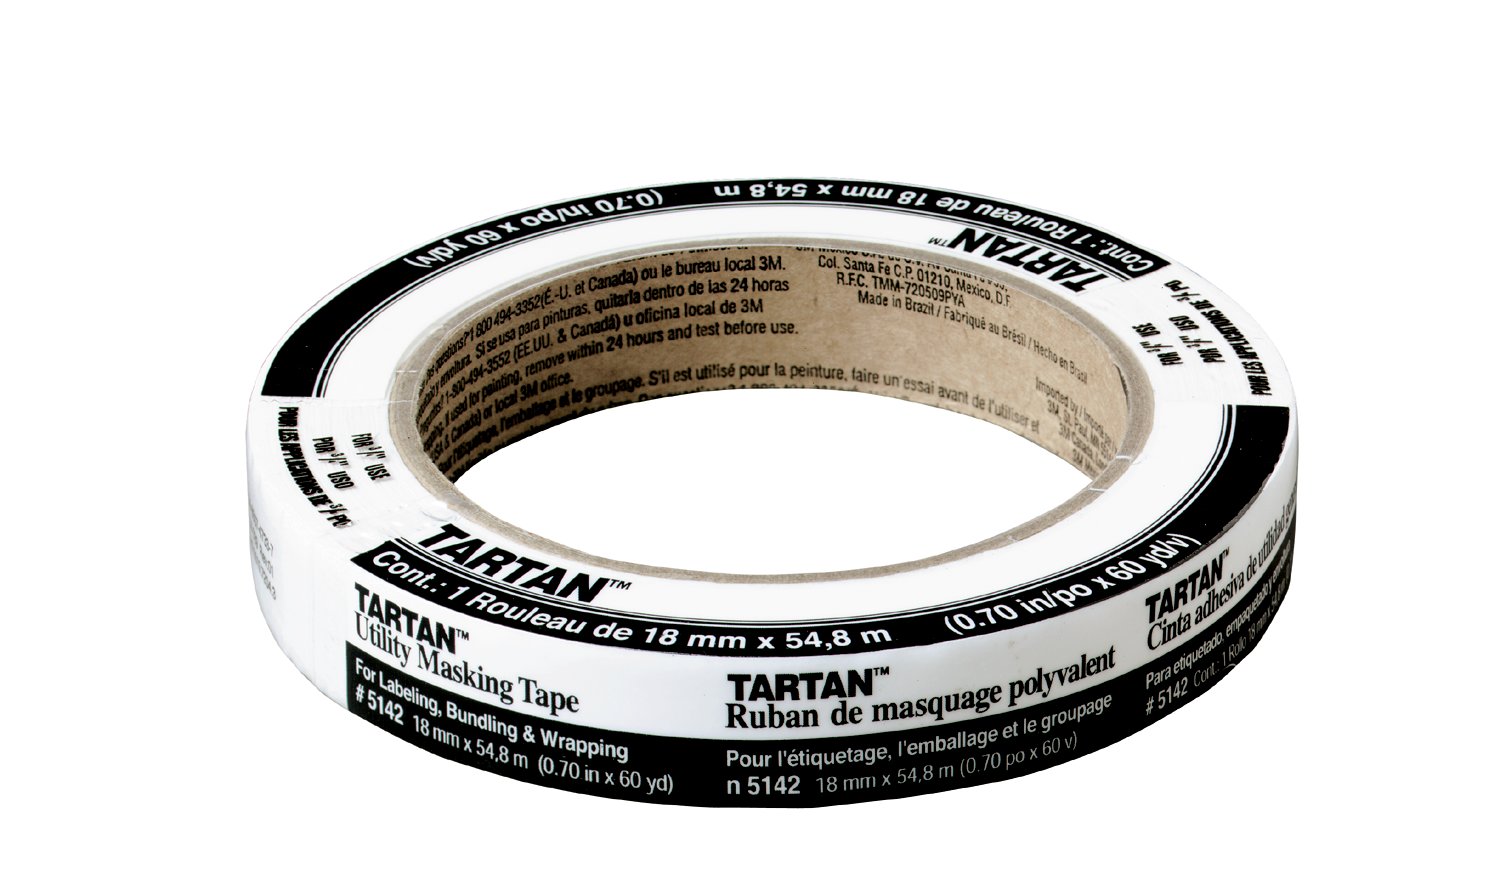 7000122516 - Tartan Utility Masking Tape 5142-.18E, .70 in x 60.1yd (18 mm x 54,8 m)
for Labeling, Bundling and Wrapping